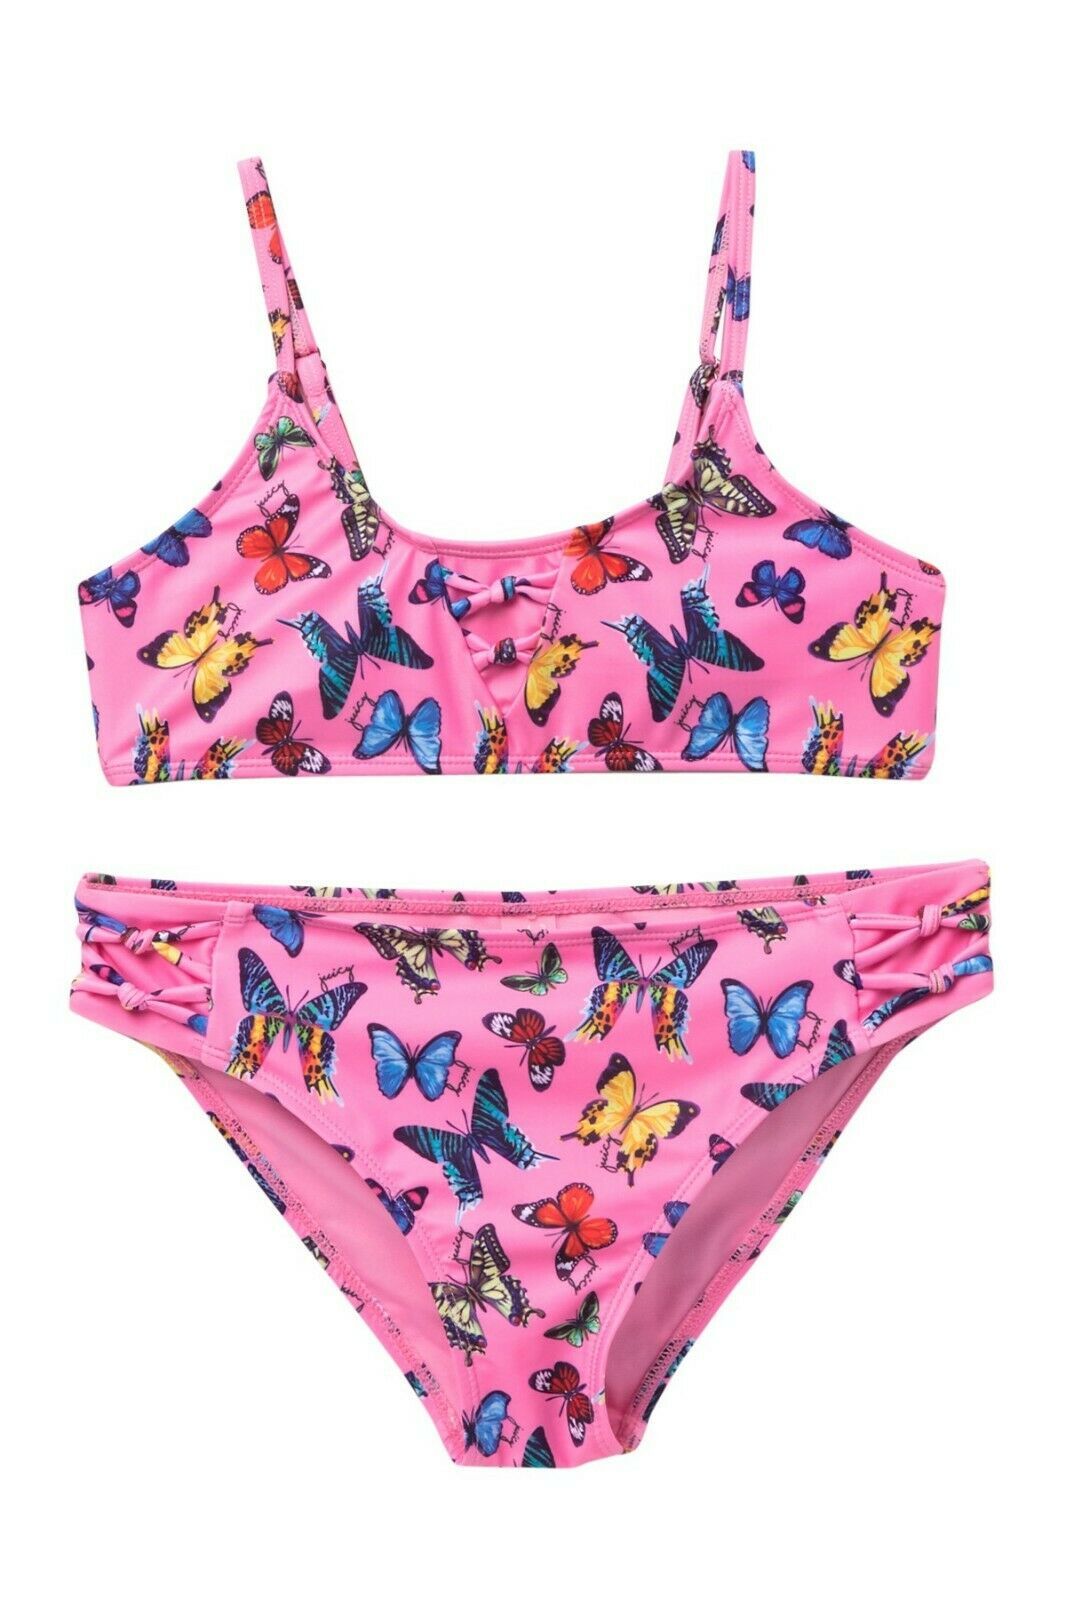 Juicy Couture Big Girls Butterfly 2-Piece Swimsuit Pink Multi ( 14 / 16 ) - $89.07